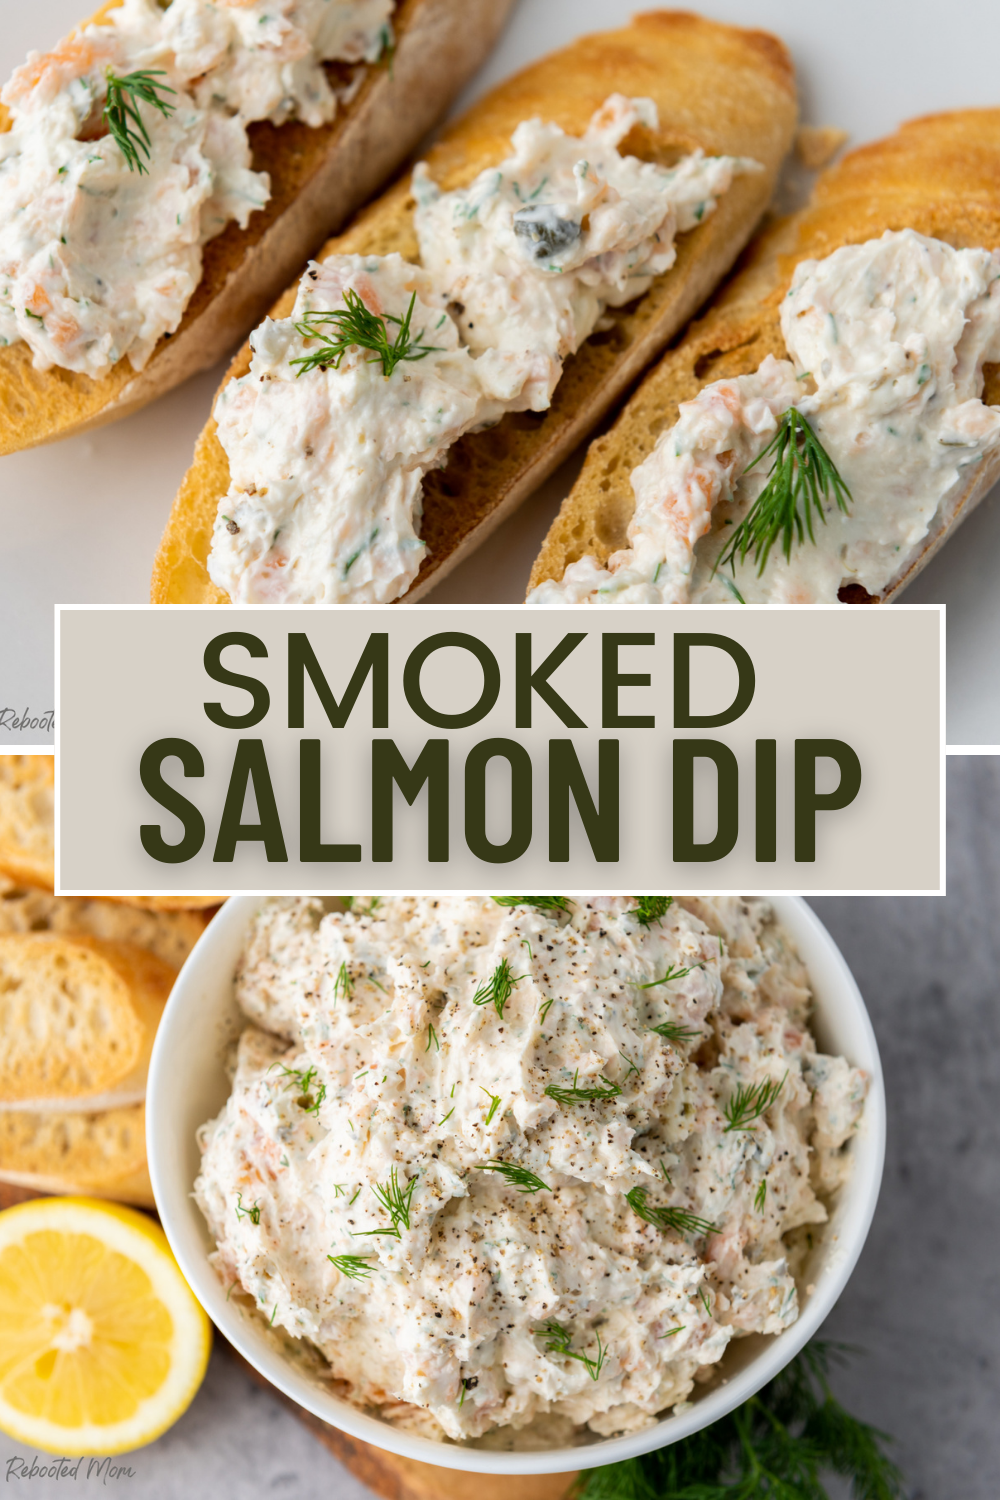 This Smoked Salmon Dip comes together with a few basic staples to create a dip that's perfect on toast or crostini - as an appetizer for parties or your Holiday table!